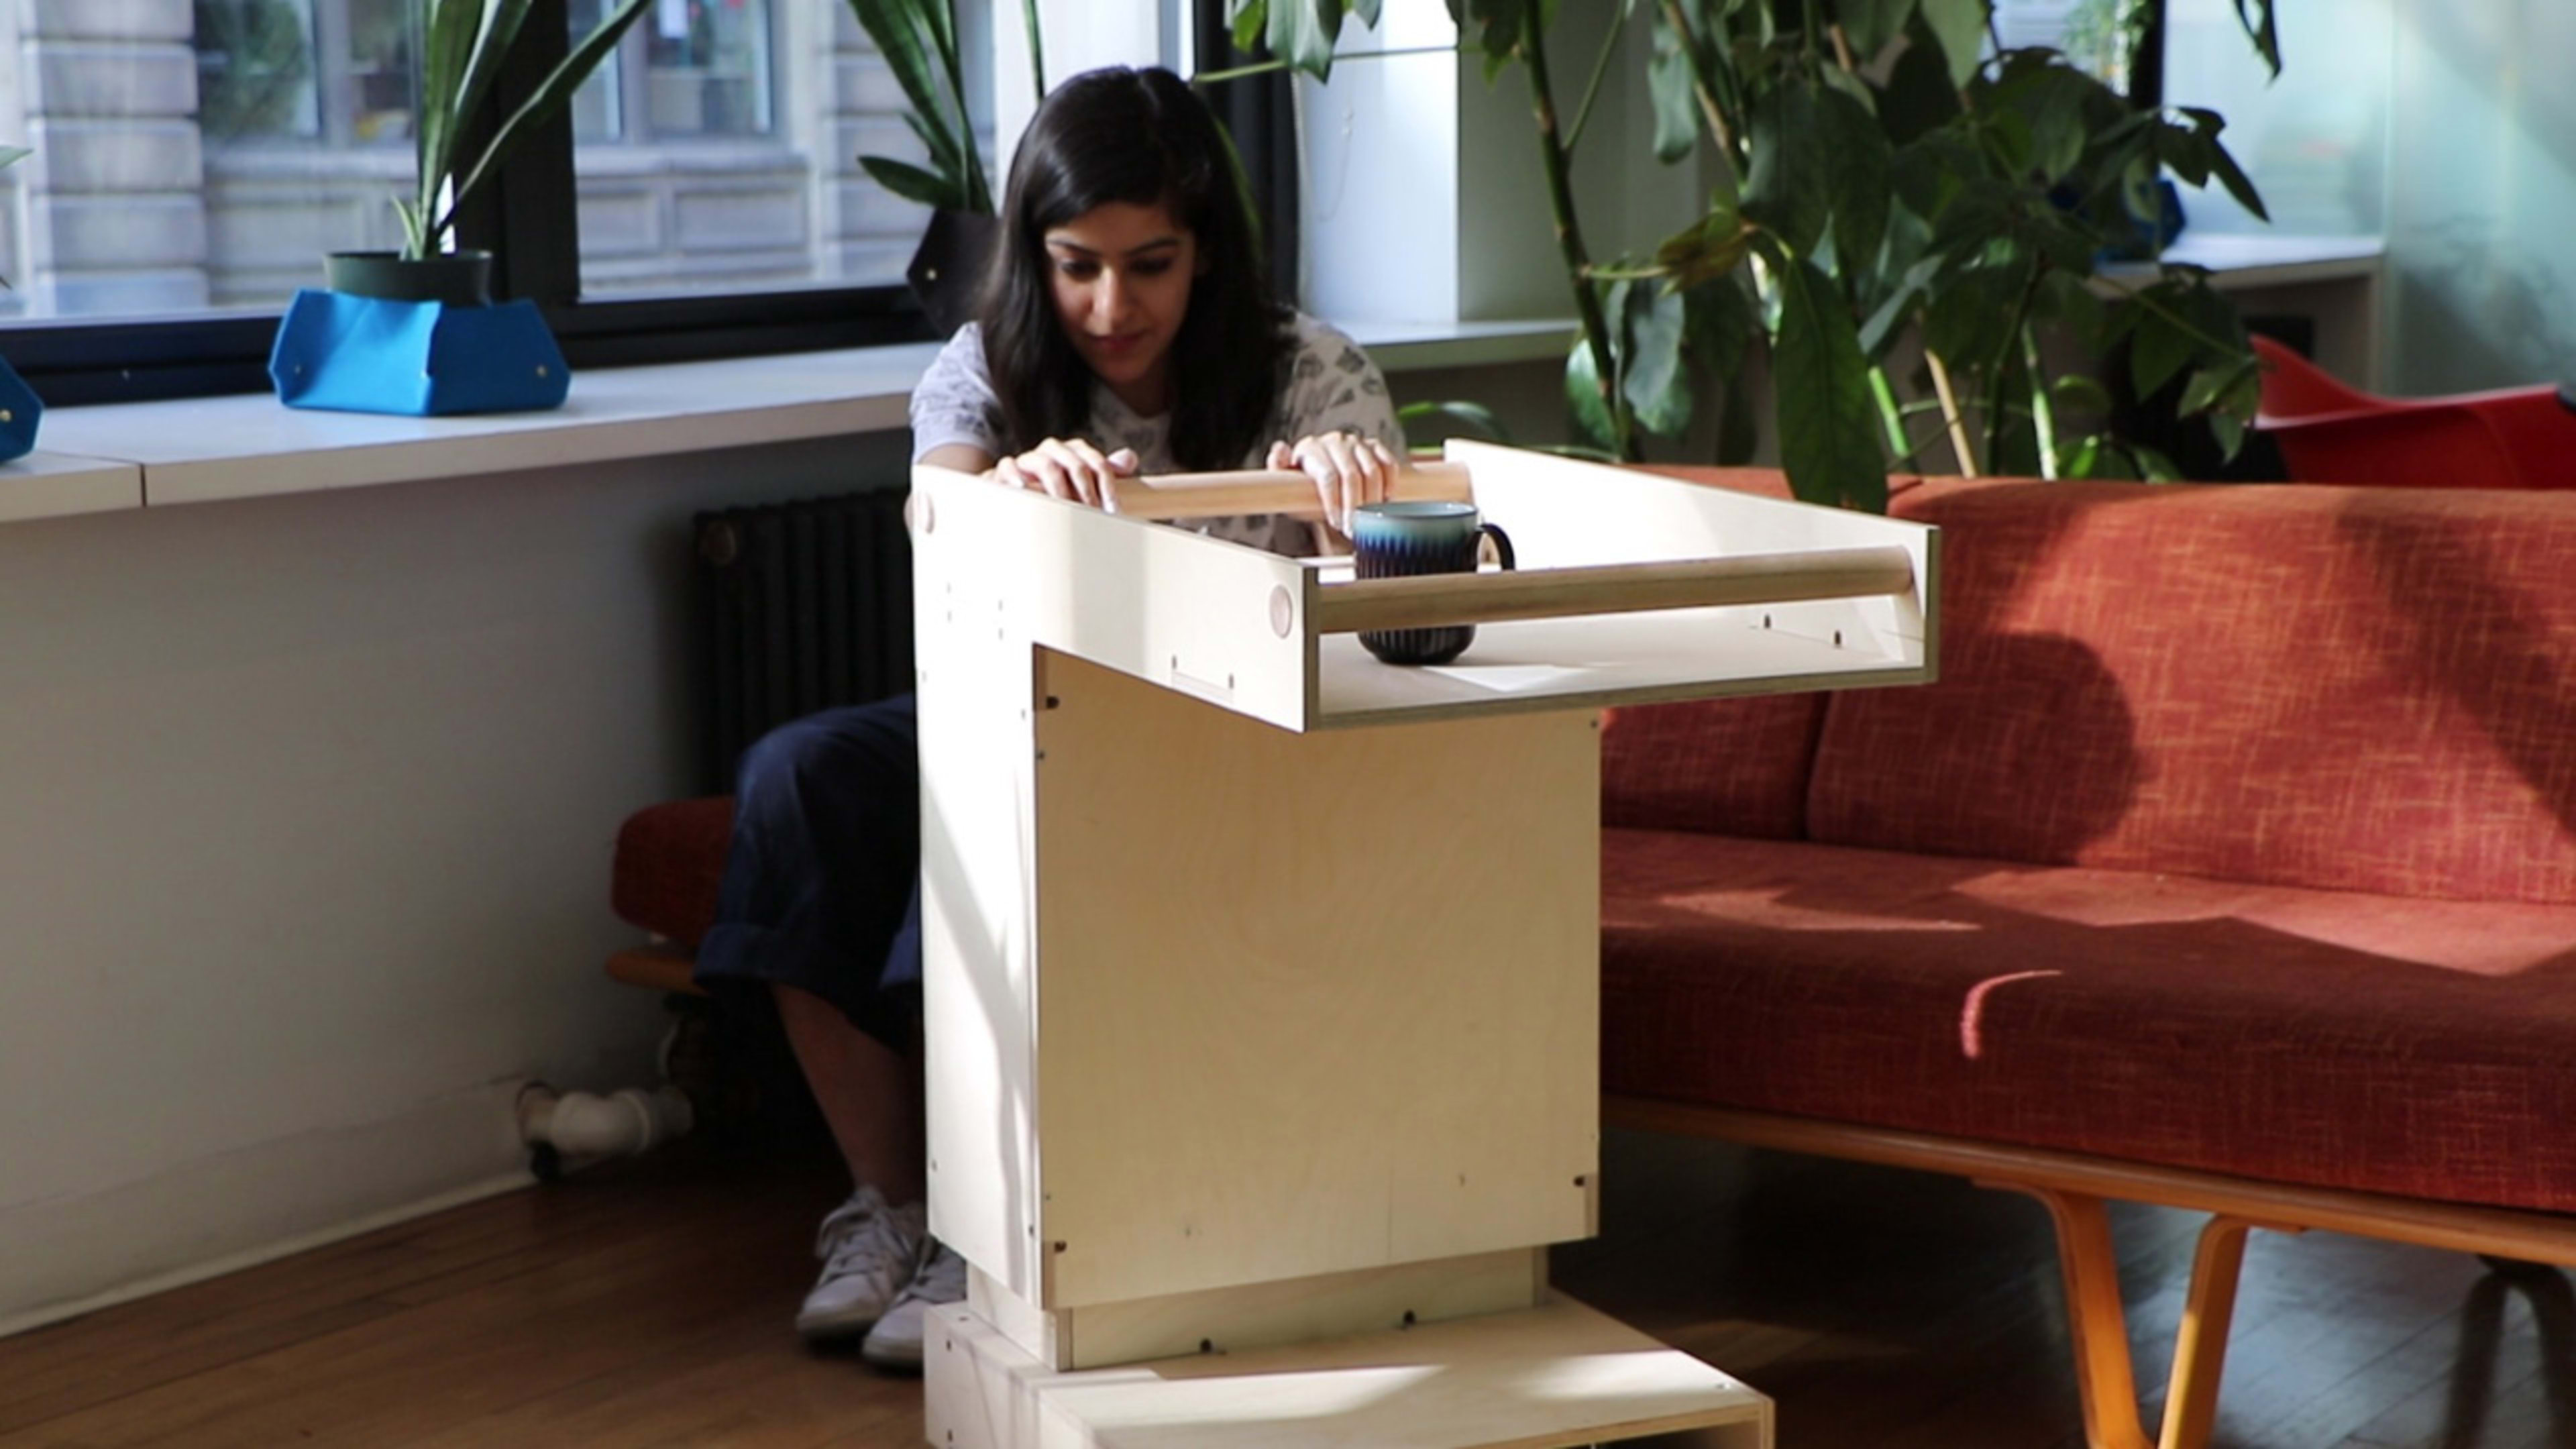 What if your coffee table was also a robot?